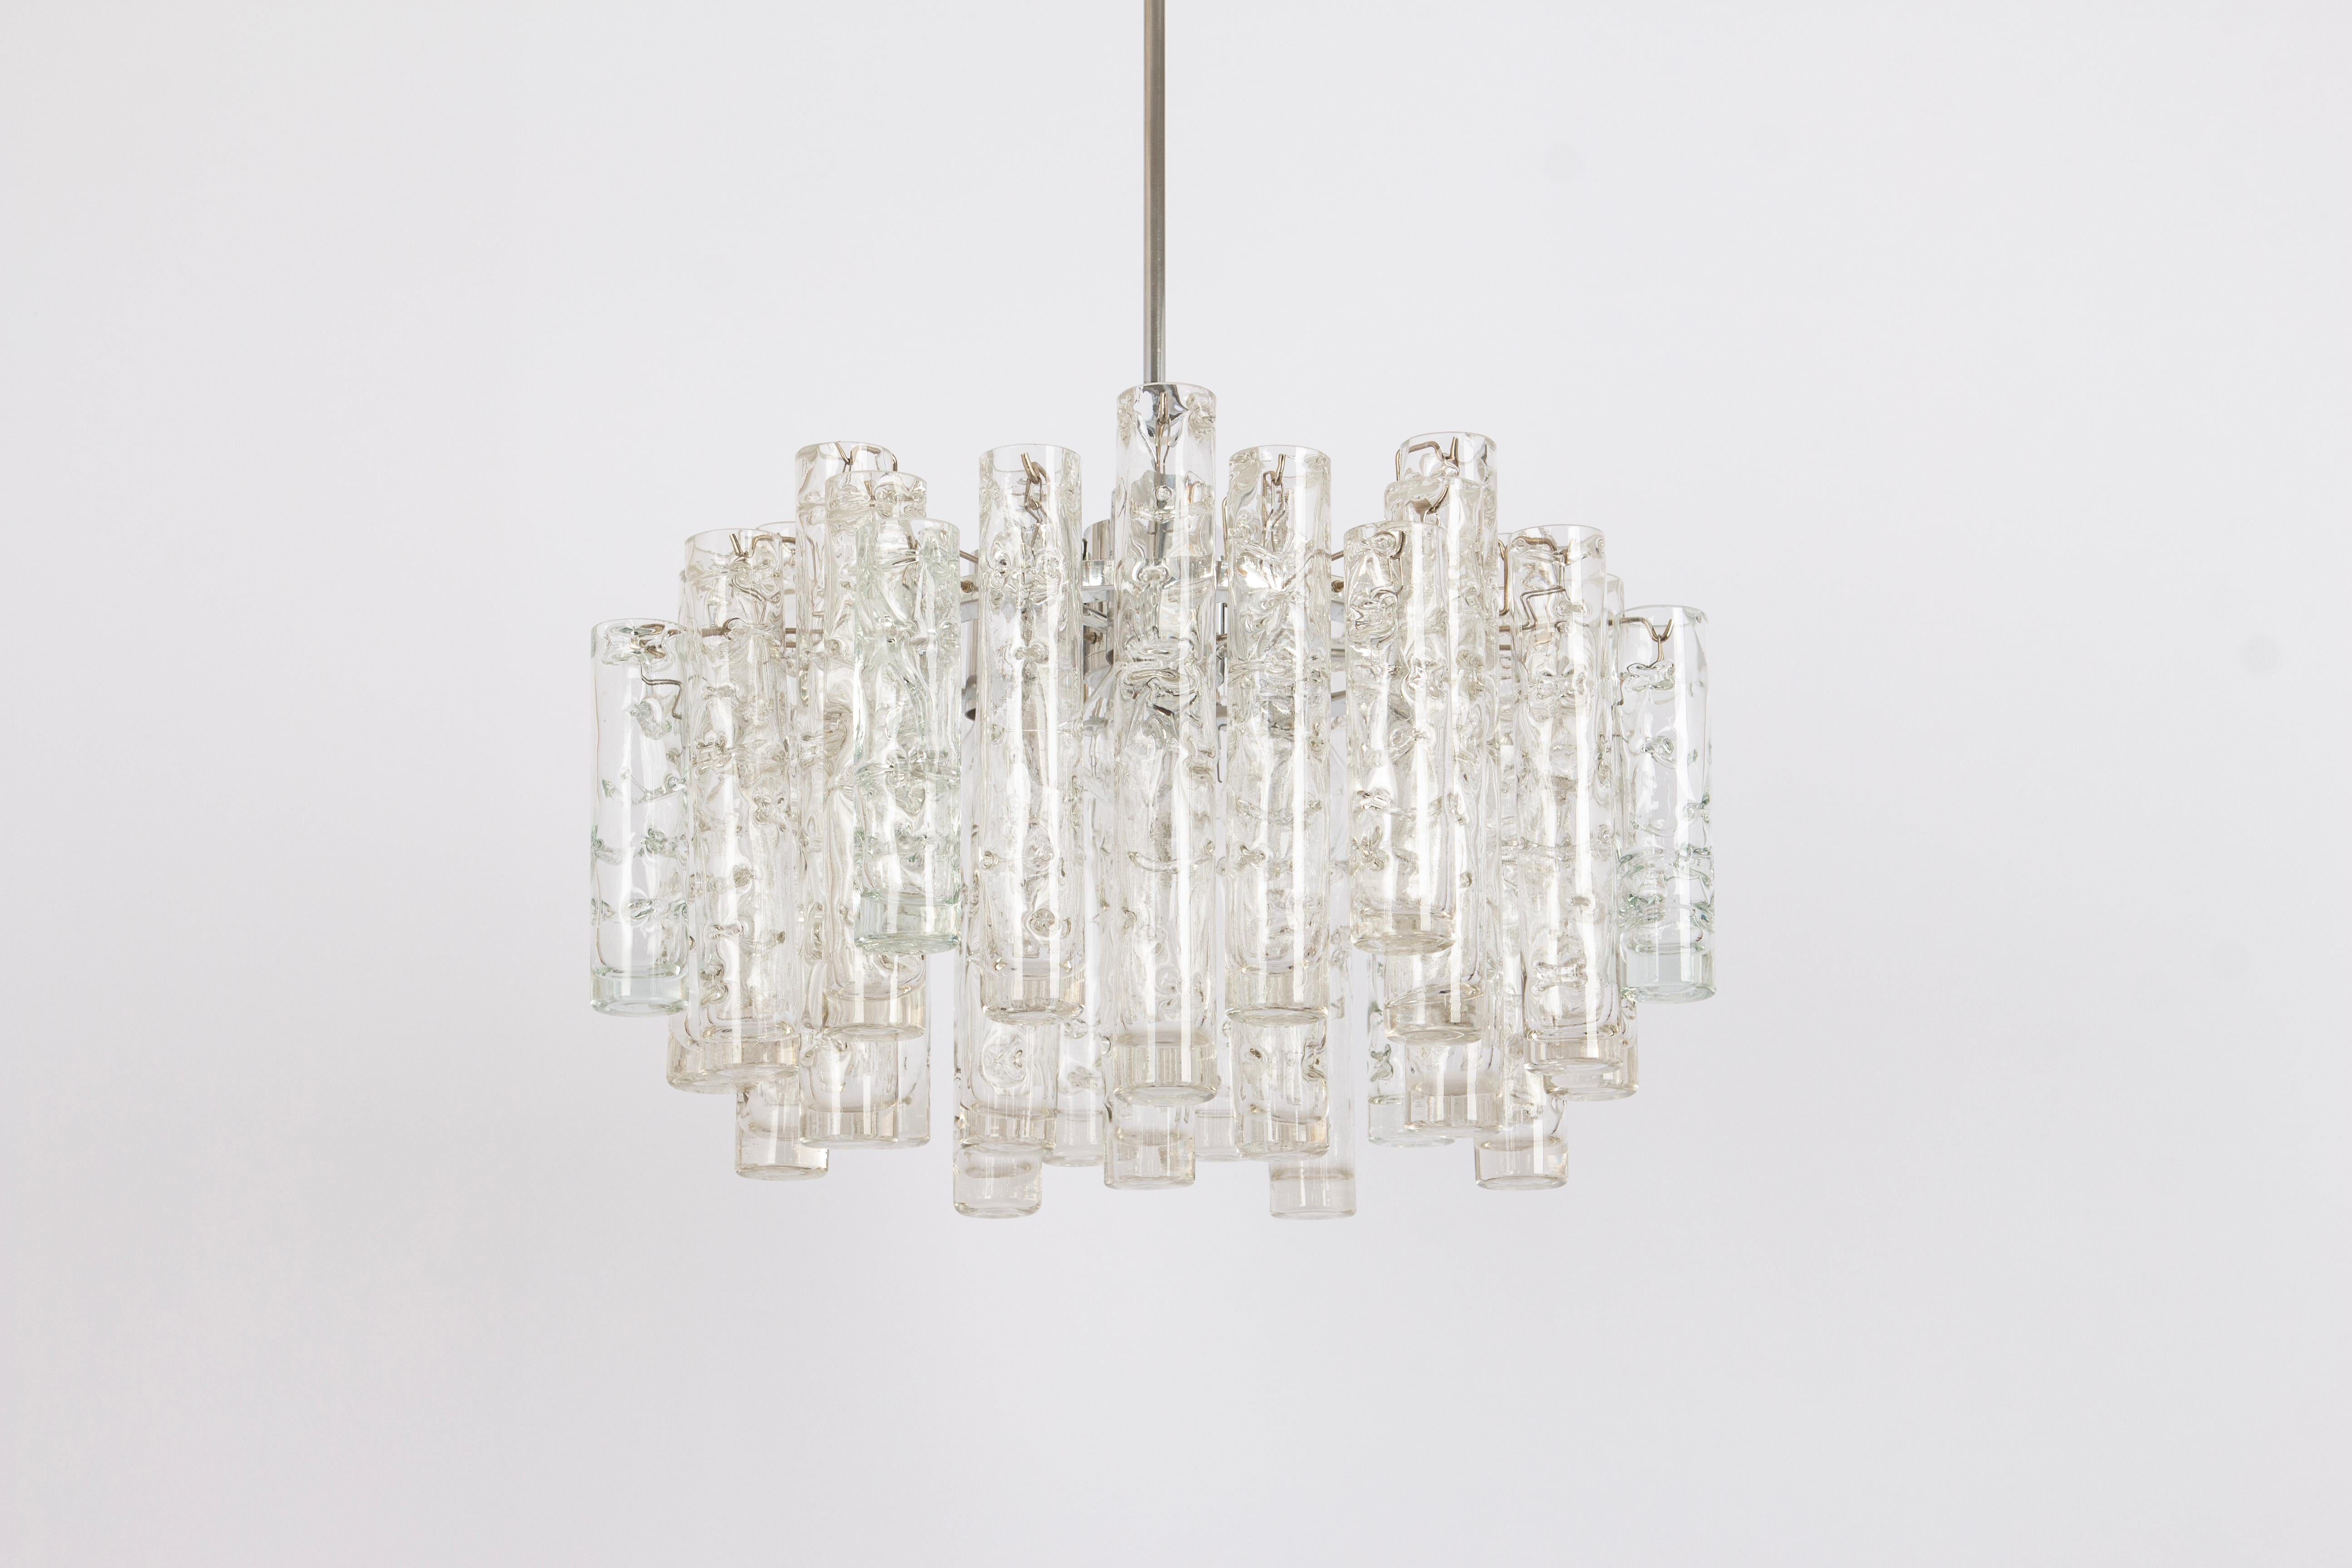 Fantastic mid-century chandelier by Doria, Germany, manufactured circa 1960-1969. A lot of Murano glass cylinders suspended from the fixture.

Heavy quality and in very good condition. Cleaned, well-wired, and ready to use.

The fixture requires 3 x